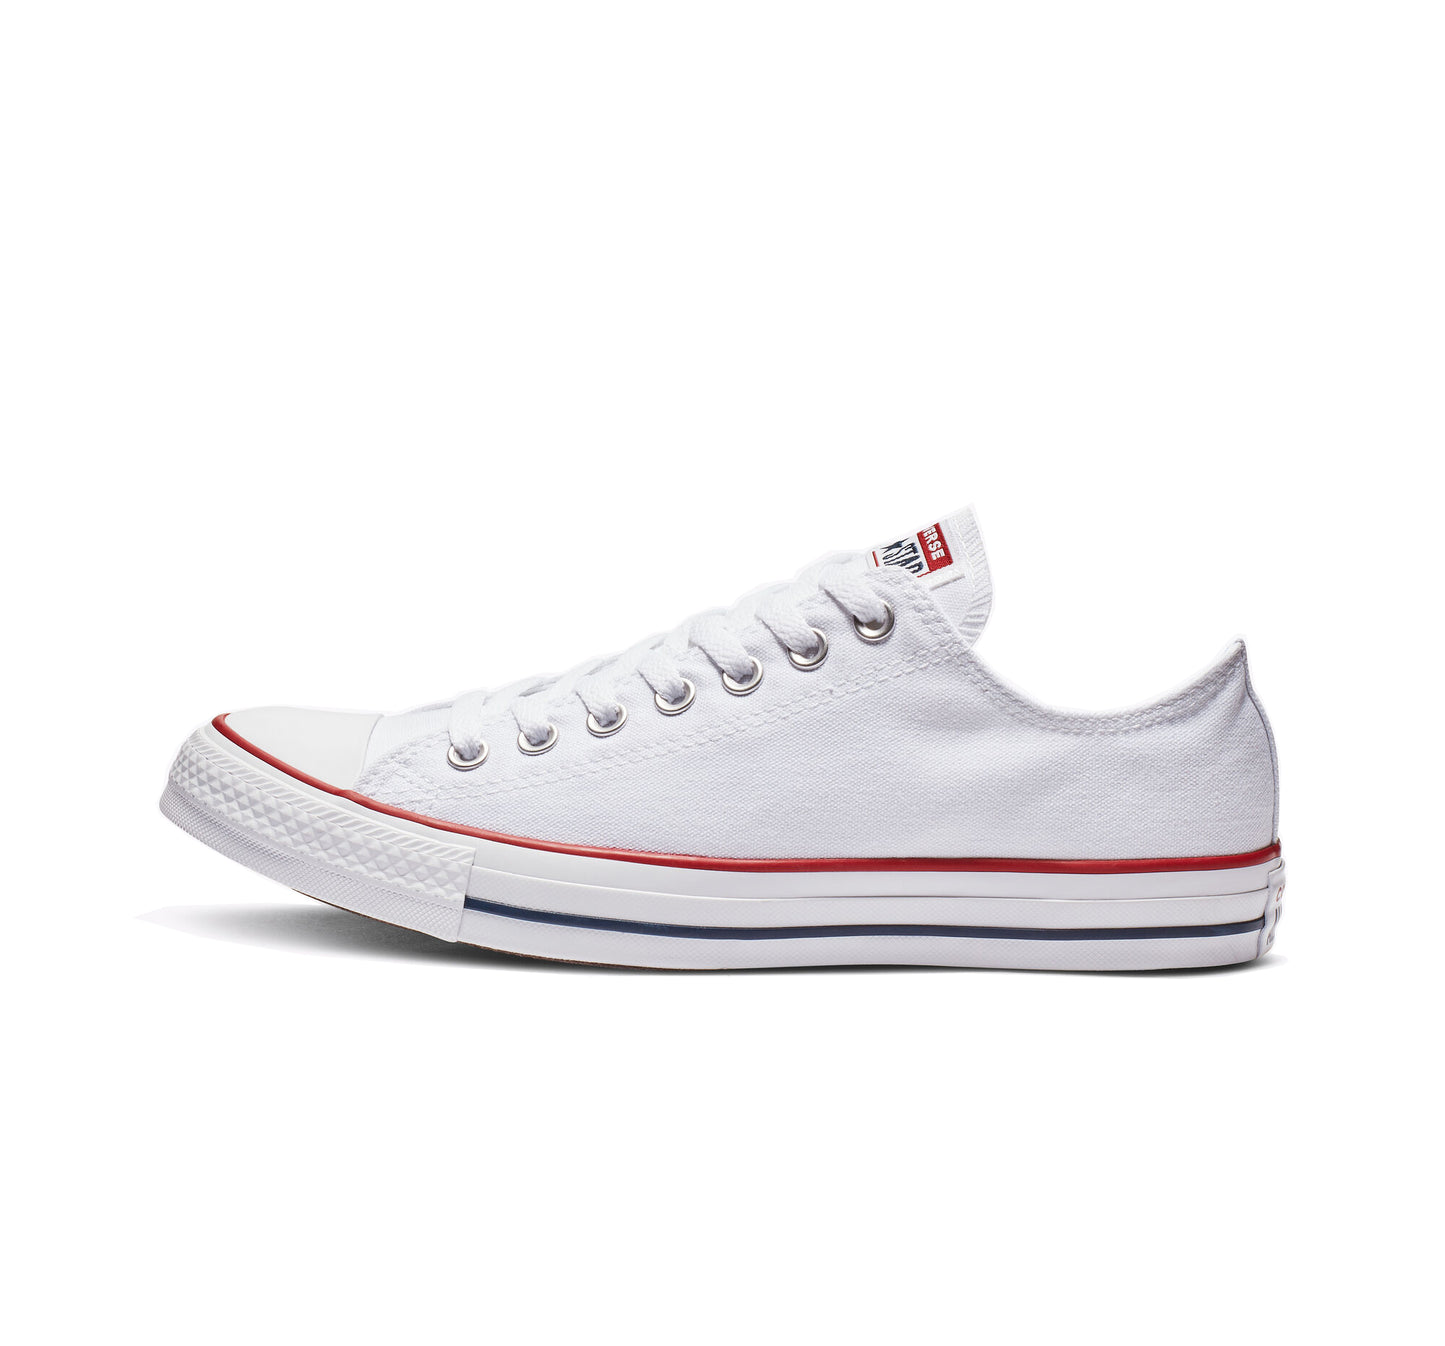 Converse Unisex Chuck Taylor All Star Low Top Shoes Optical White M7652 / M7652C